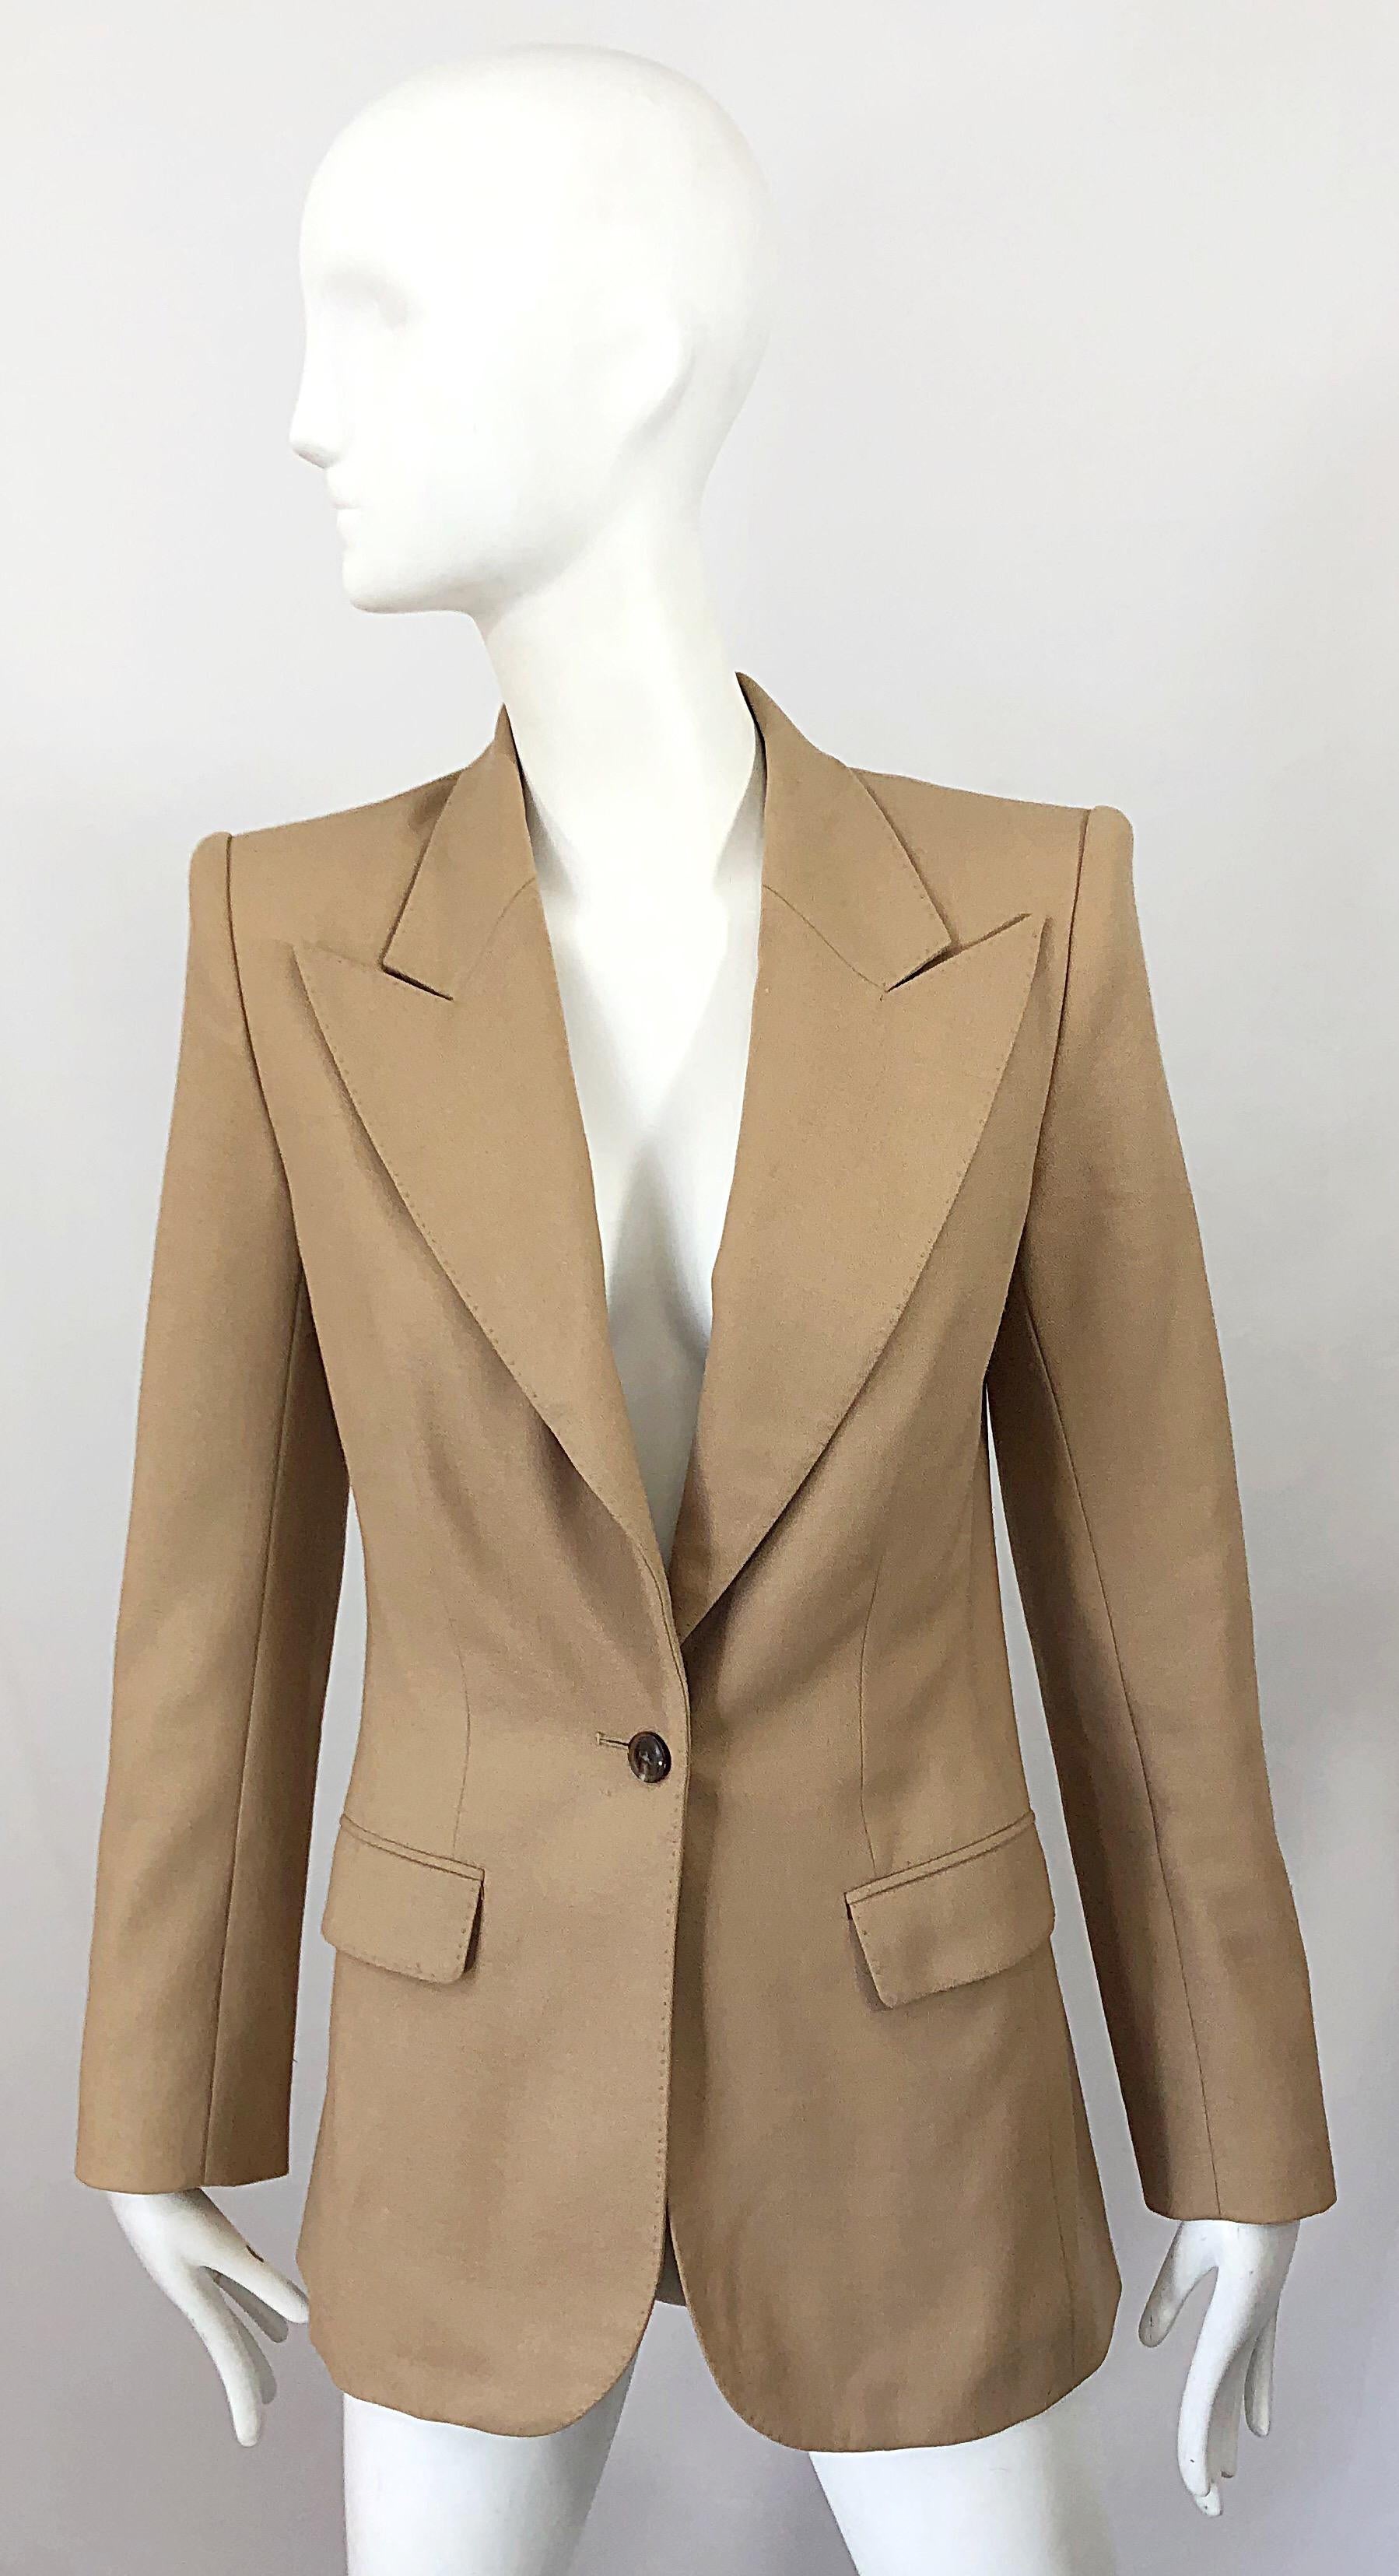 Sleek camel wool blazer by THE ROW! Features soft virgin wool that is fully lined in a soft pink silk (even the pockets are lined). Single button closure, with YSL style exaggerated lapels. Pockets at each side of the waist, Can easily be dressed up